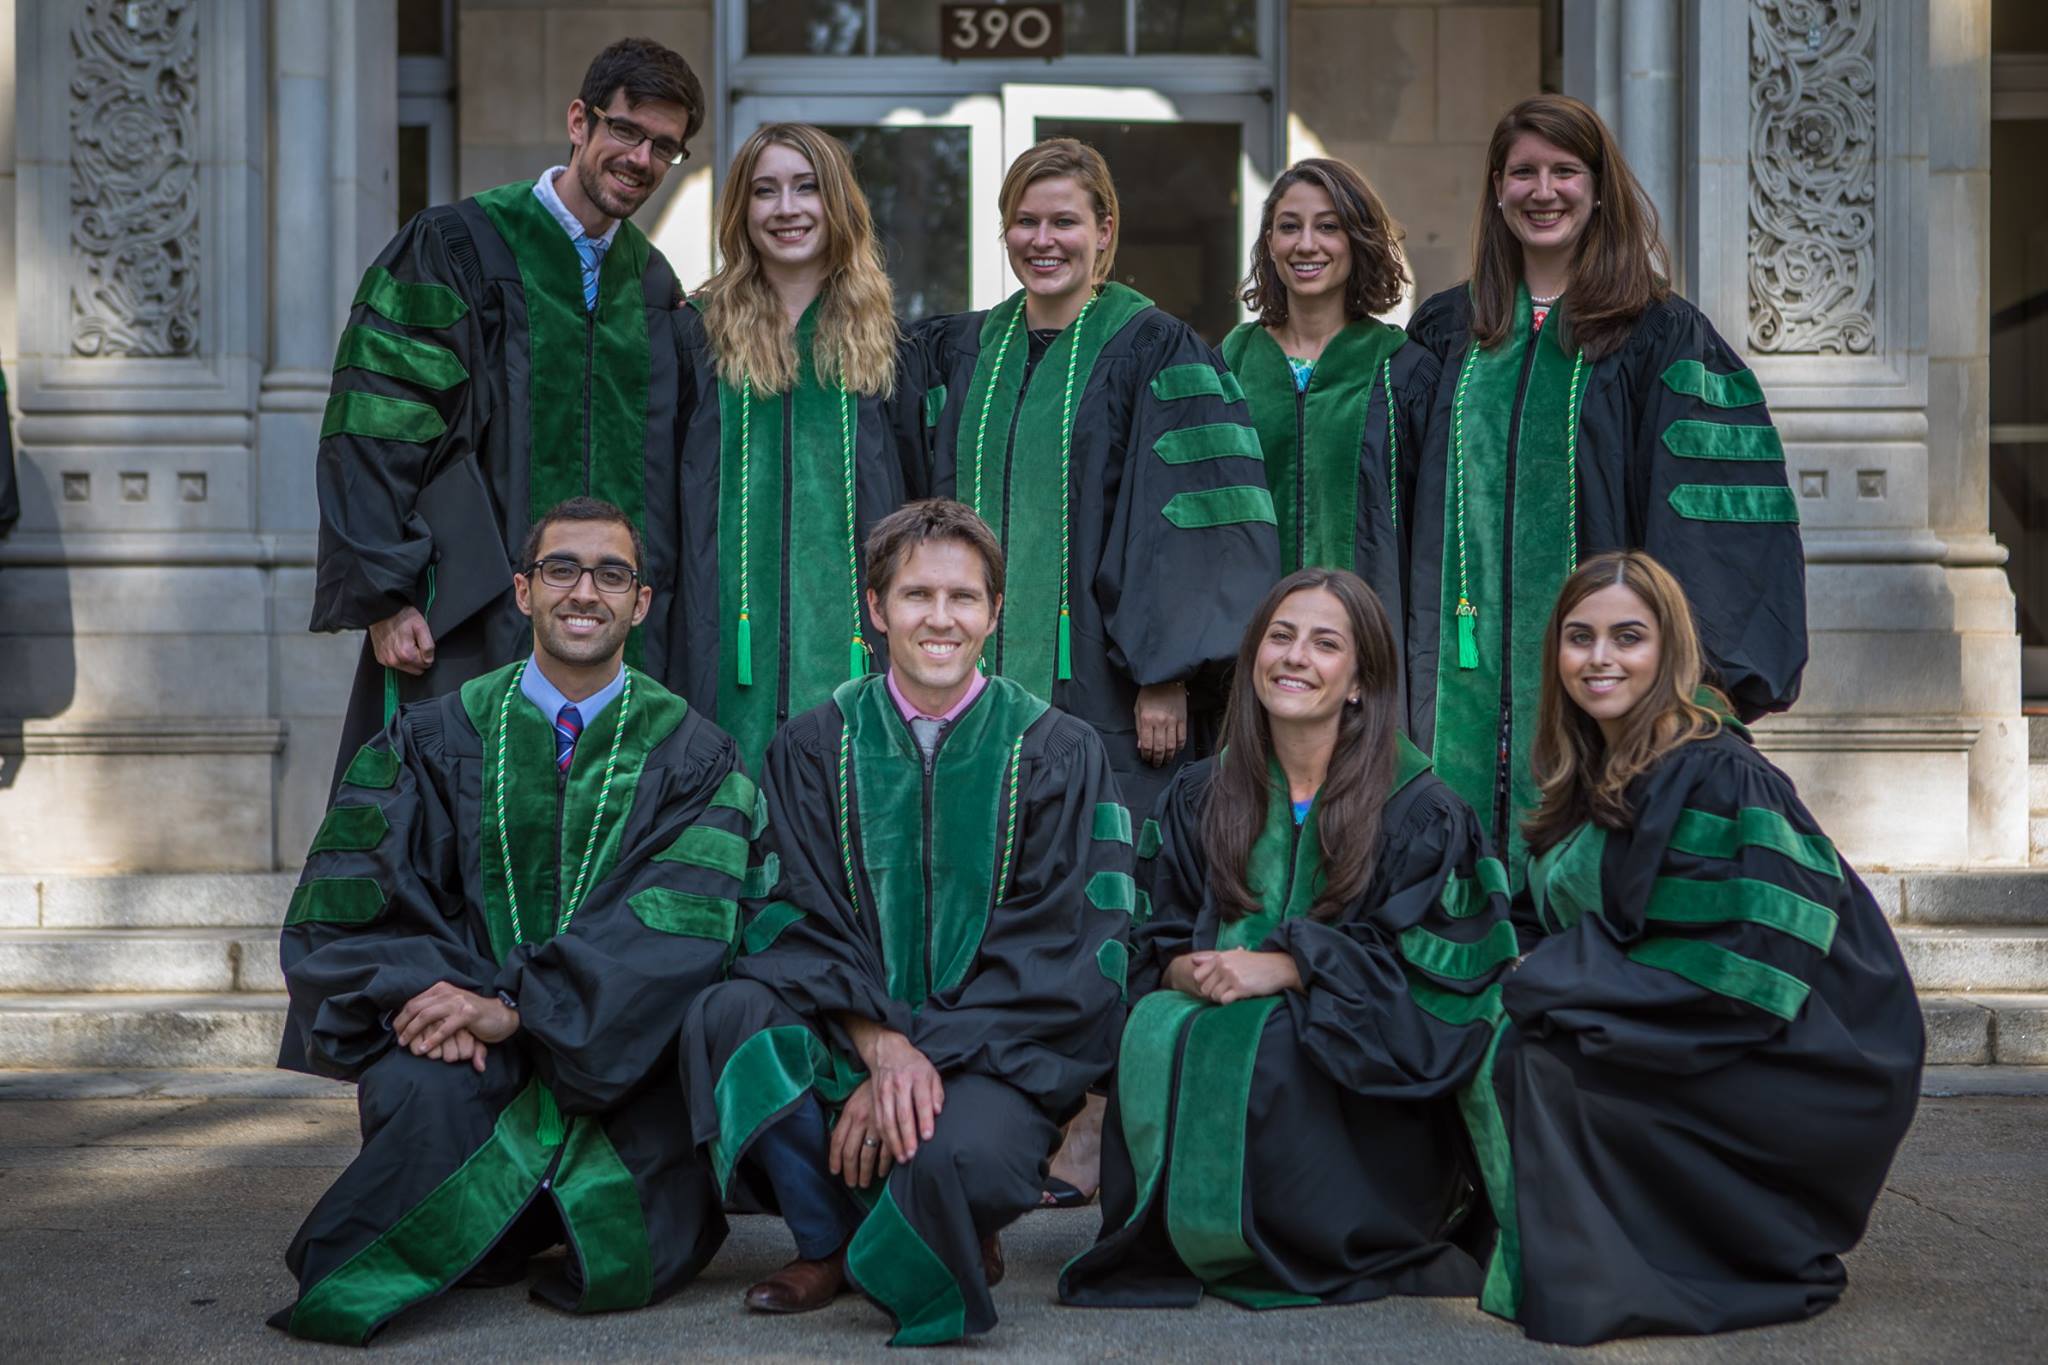 The first cohort of the David Geffen Medical Scholarships at graduation, pictured here in their green and black regalia. 